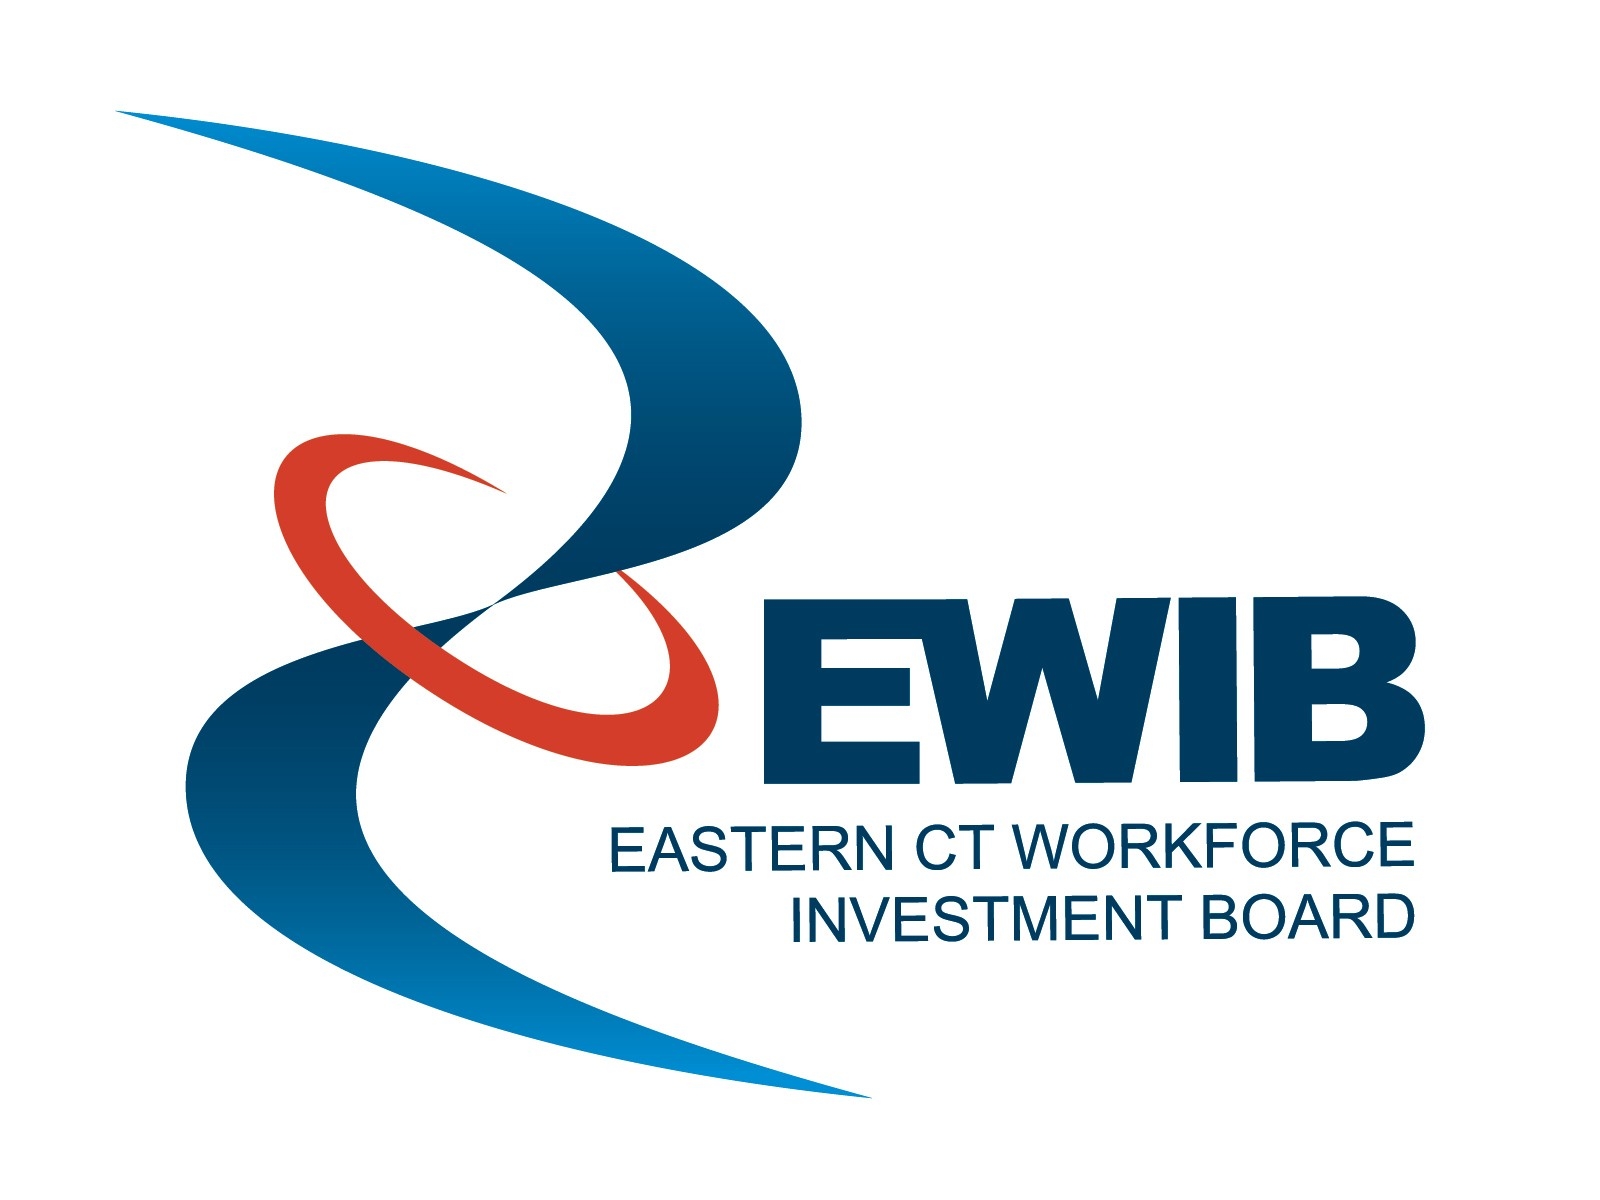 Eastern CT Workforce Investment Board